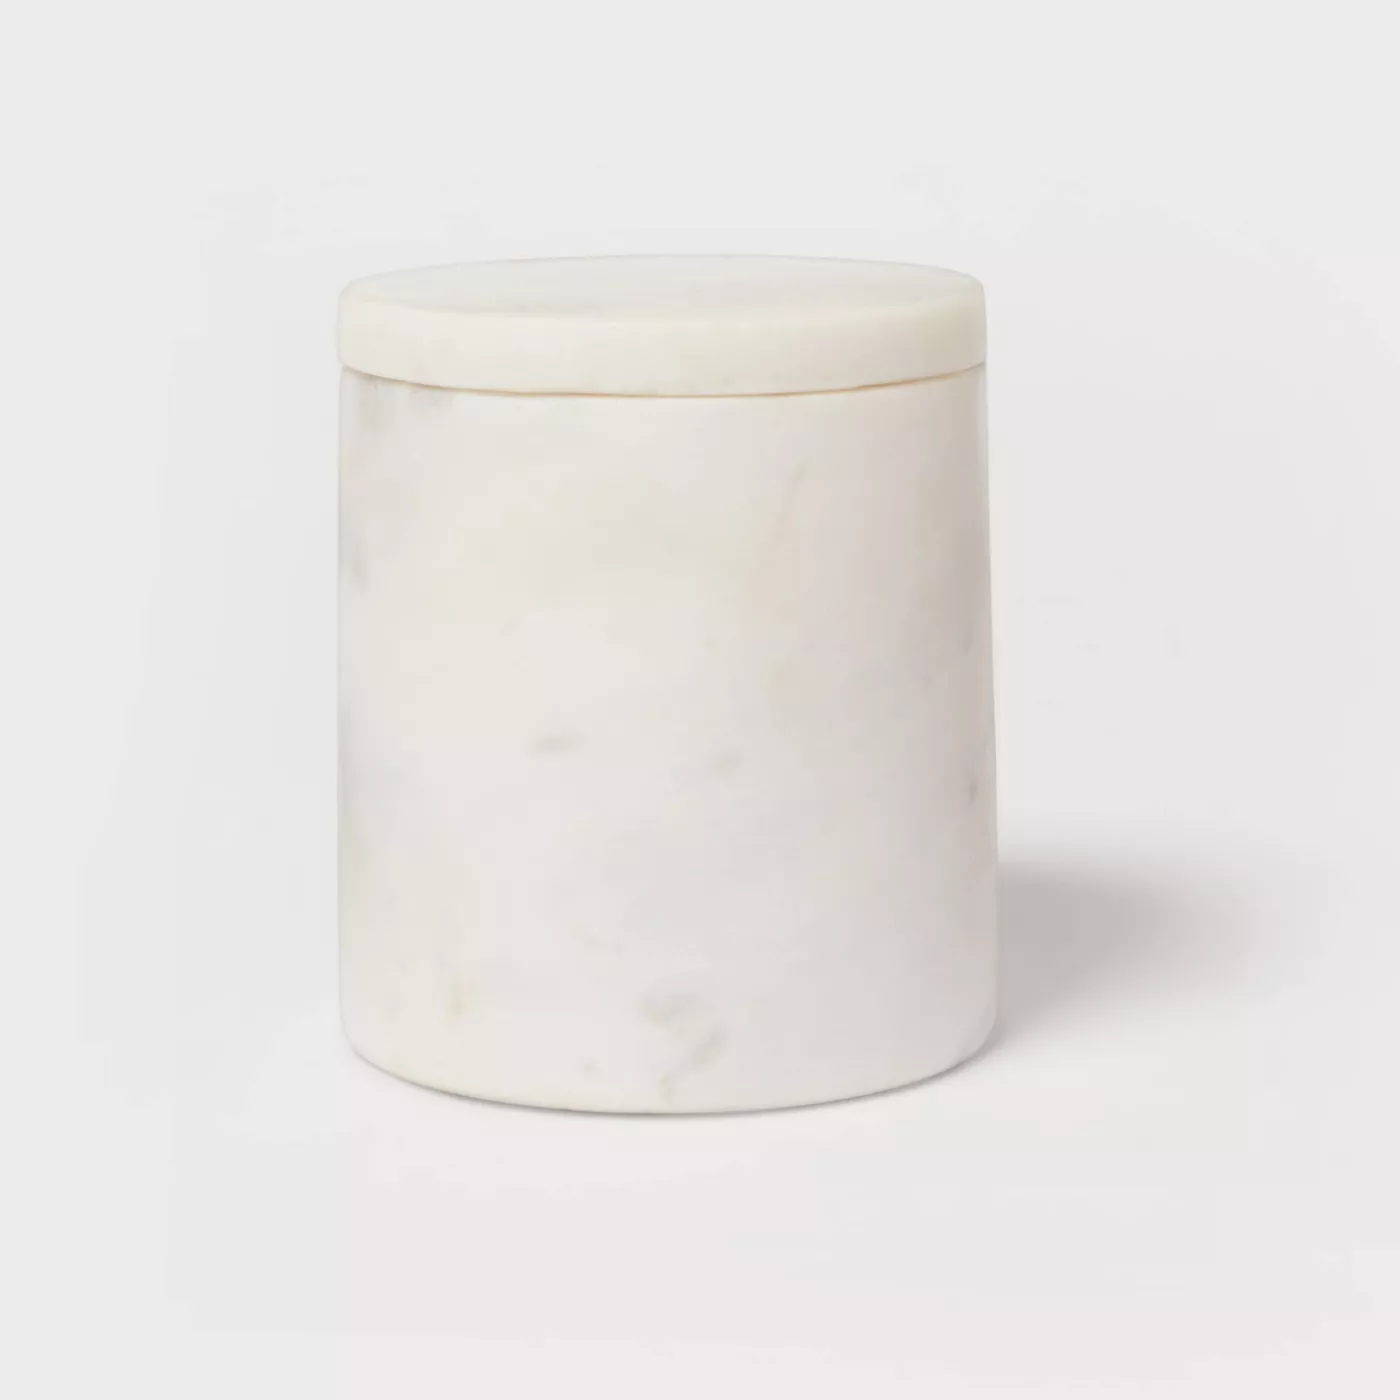 Marble Canister White - Threshold. #marble #canisters #kitchenwares